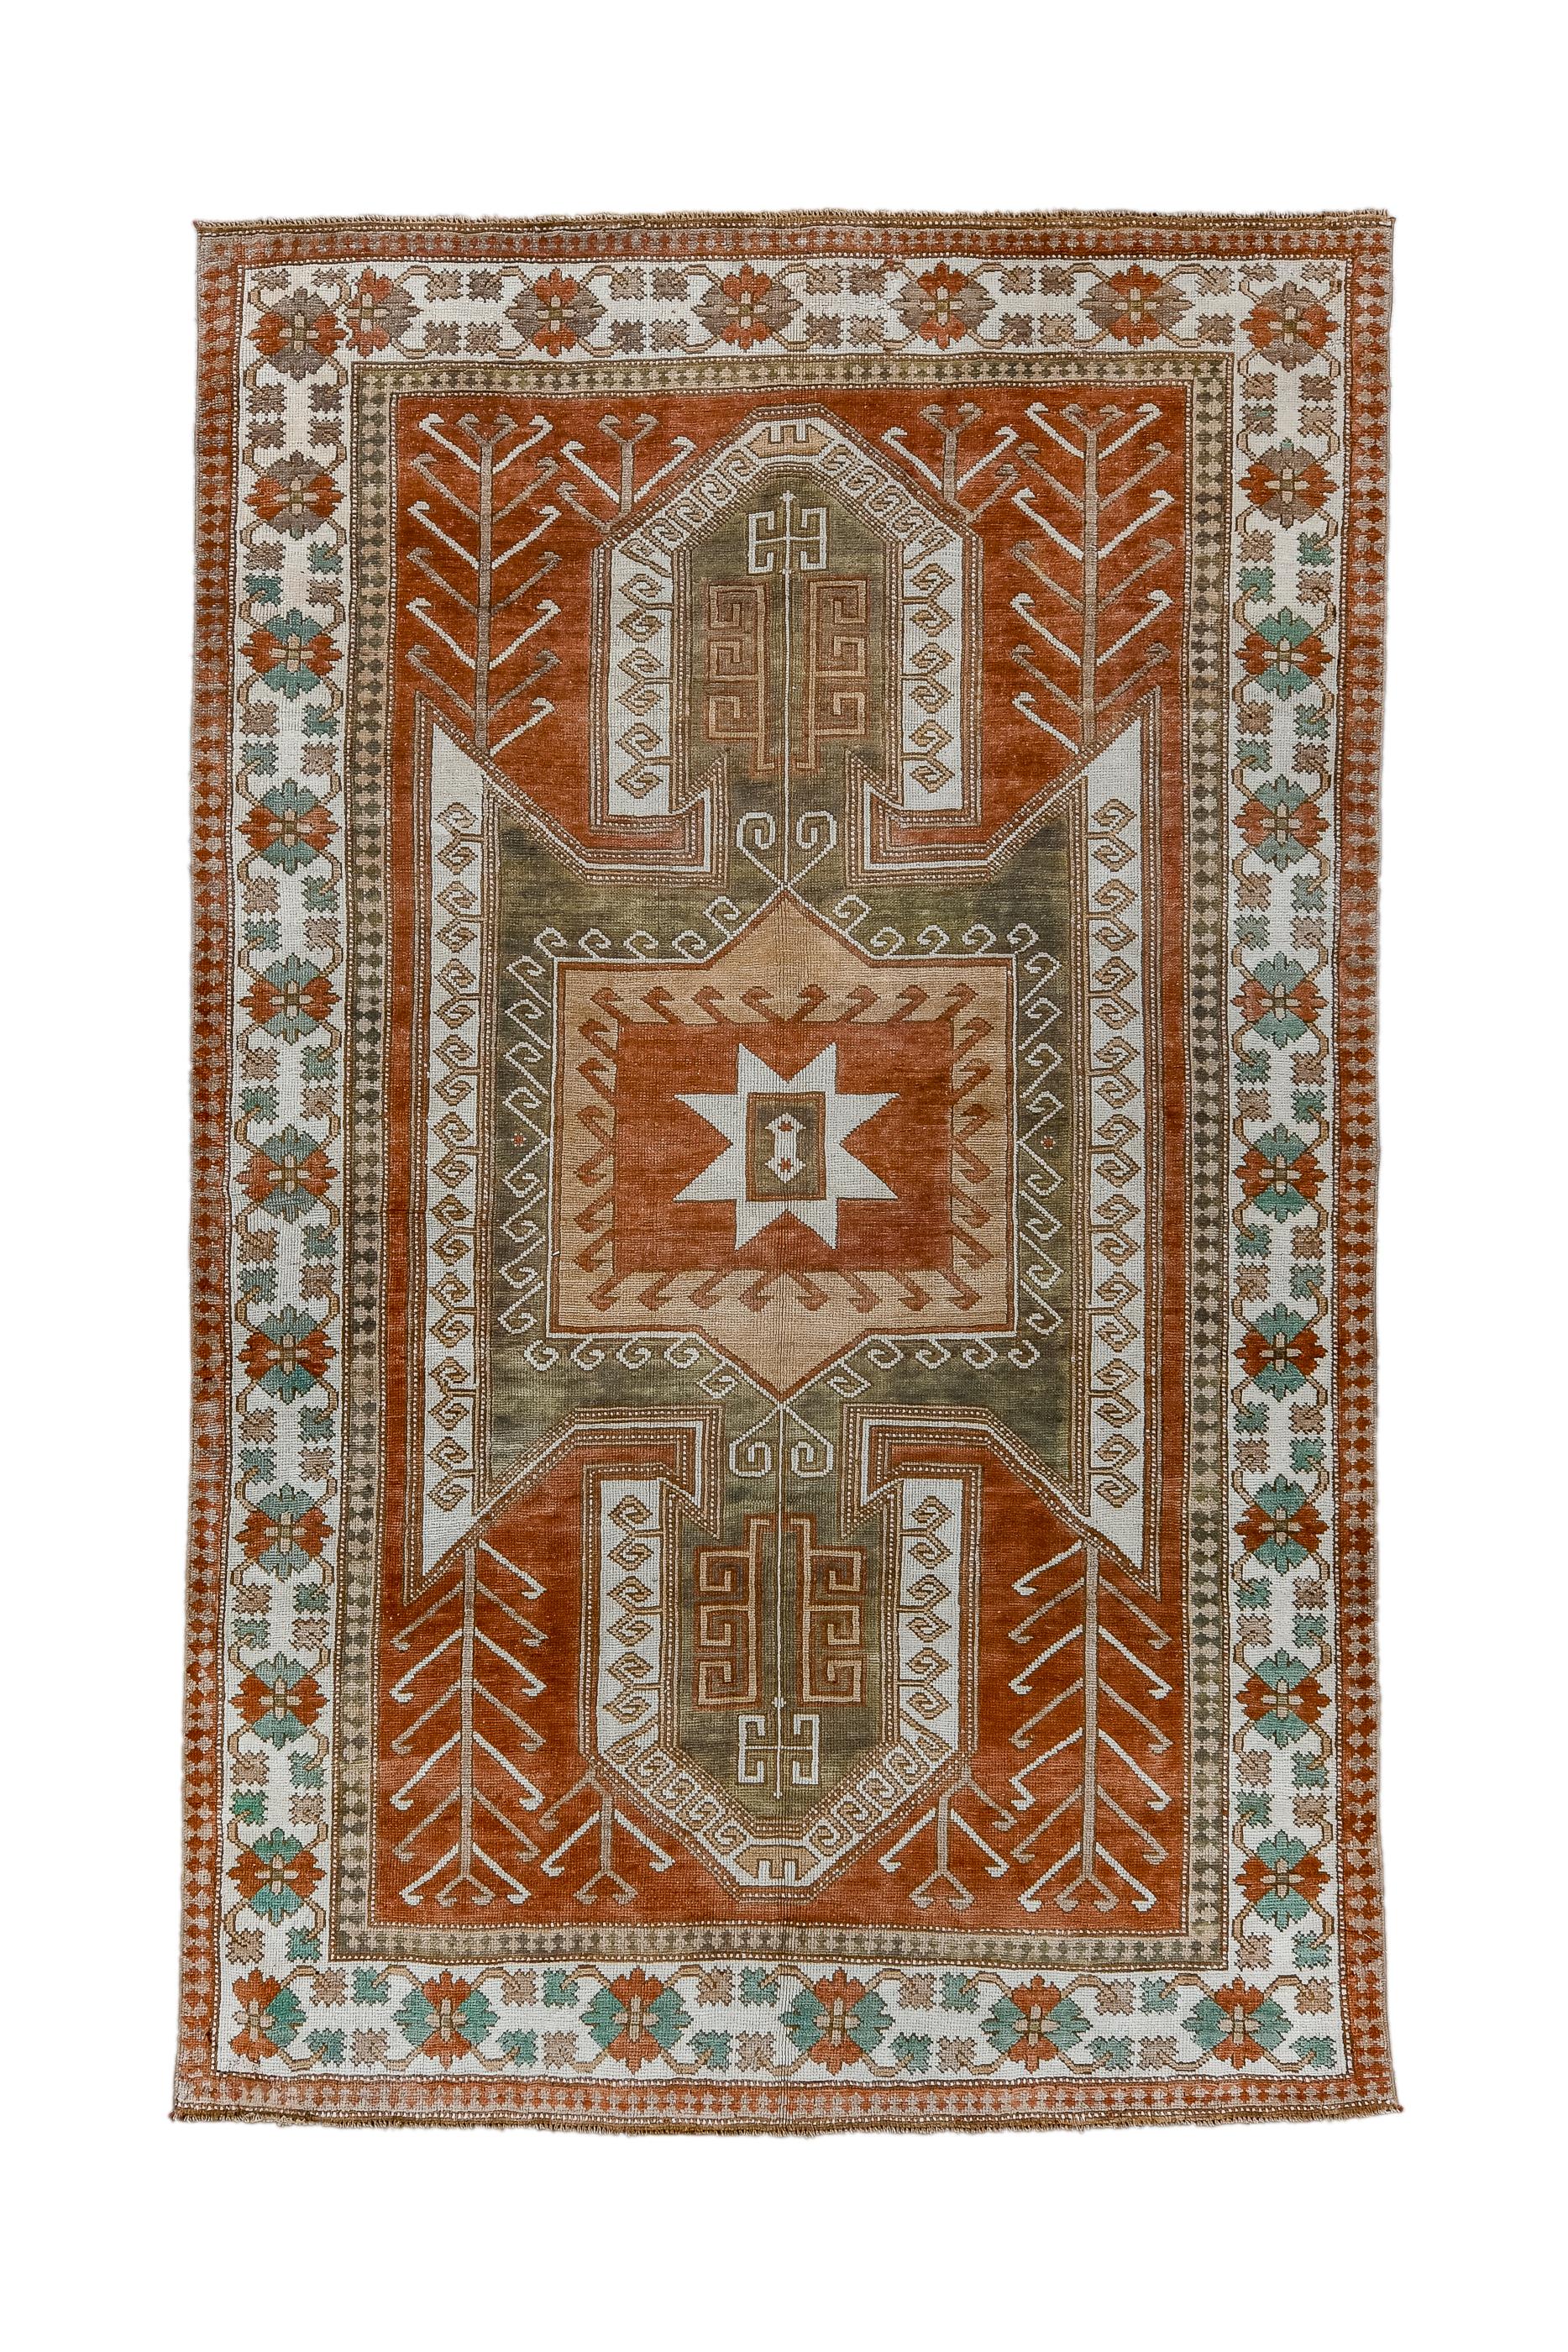 Kars, along with Tiflis and Erivan marks the limits of the Caucasian Kazak weaving area and it is no surprise to find Kars rugs in Caucasian Sewan Kazak patterns. Here the red field shows a bold, winged medallion, with nested and hooked panels